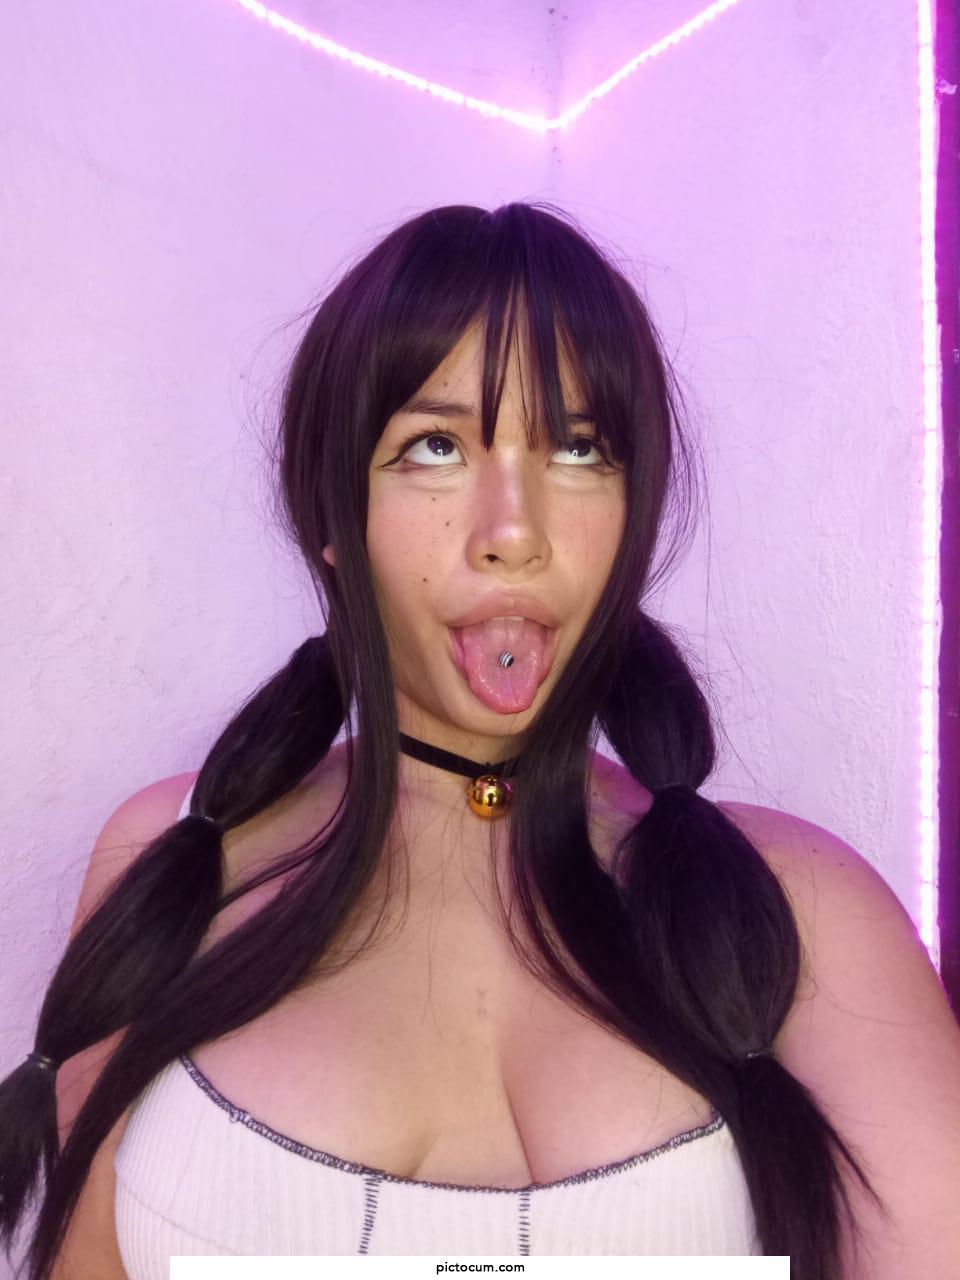 Can someone pls cum in my tongue